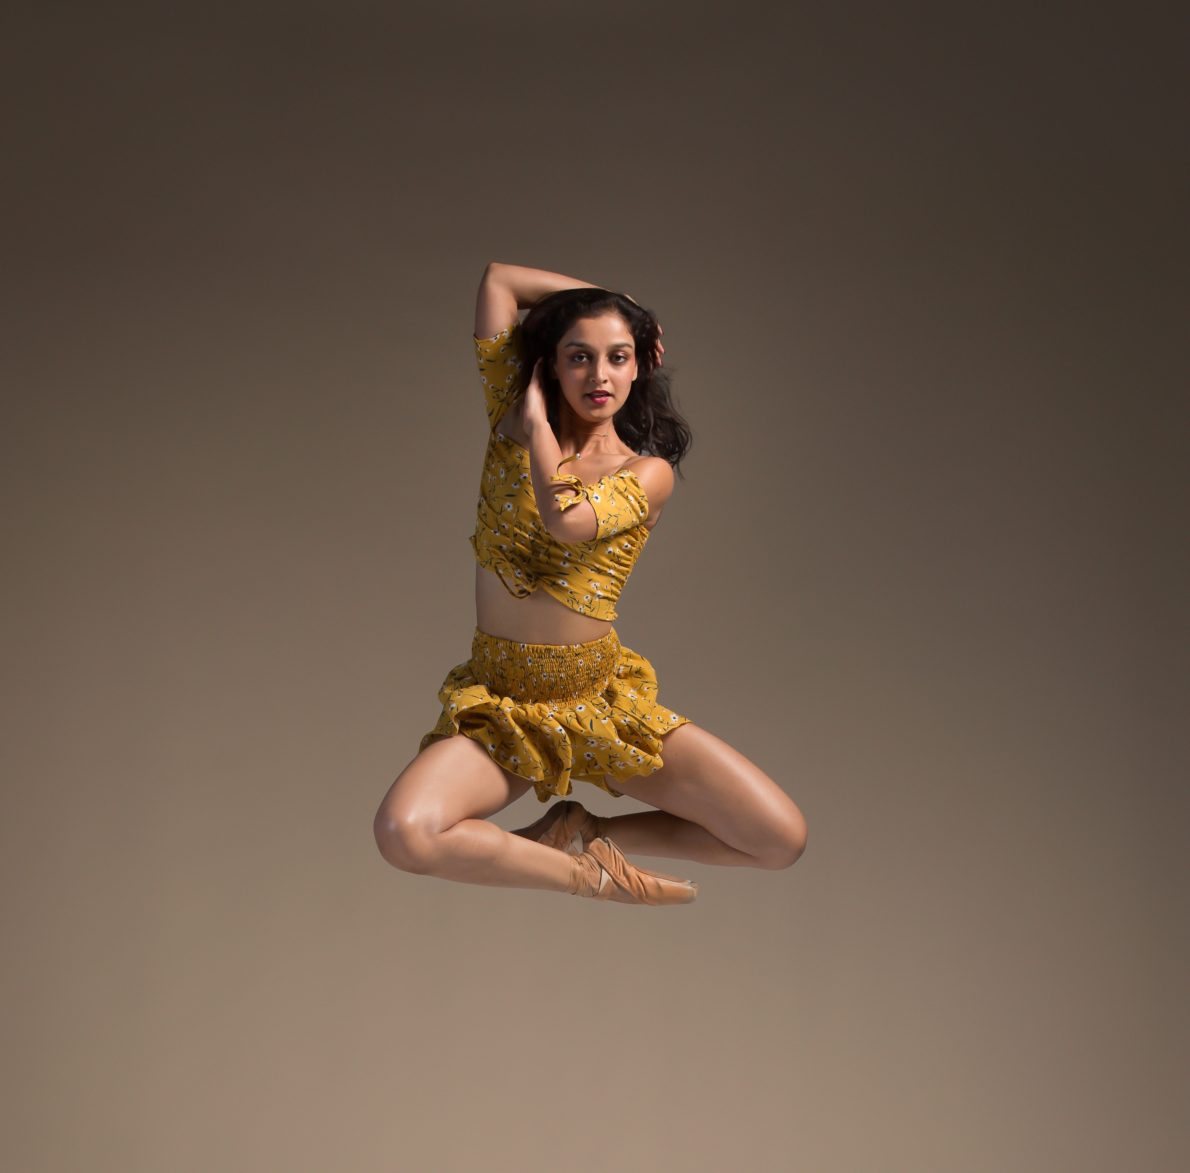 A woman in yellow leotard and skirt jumping.